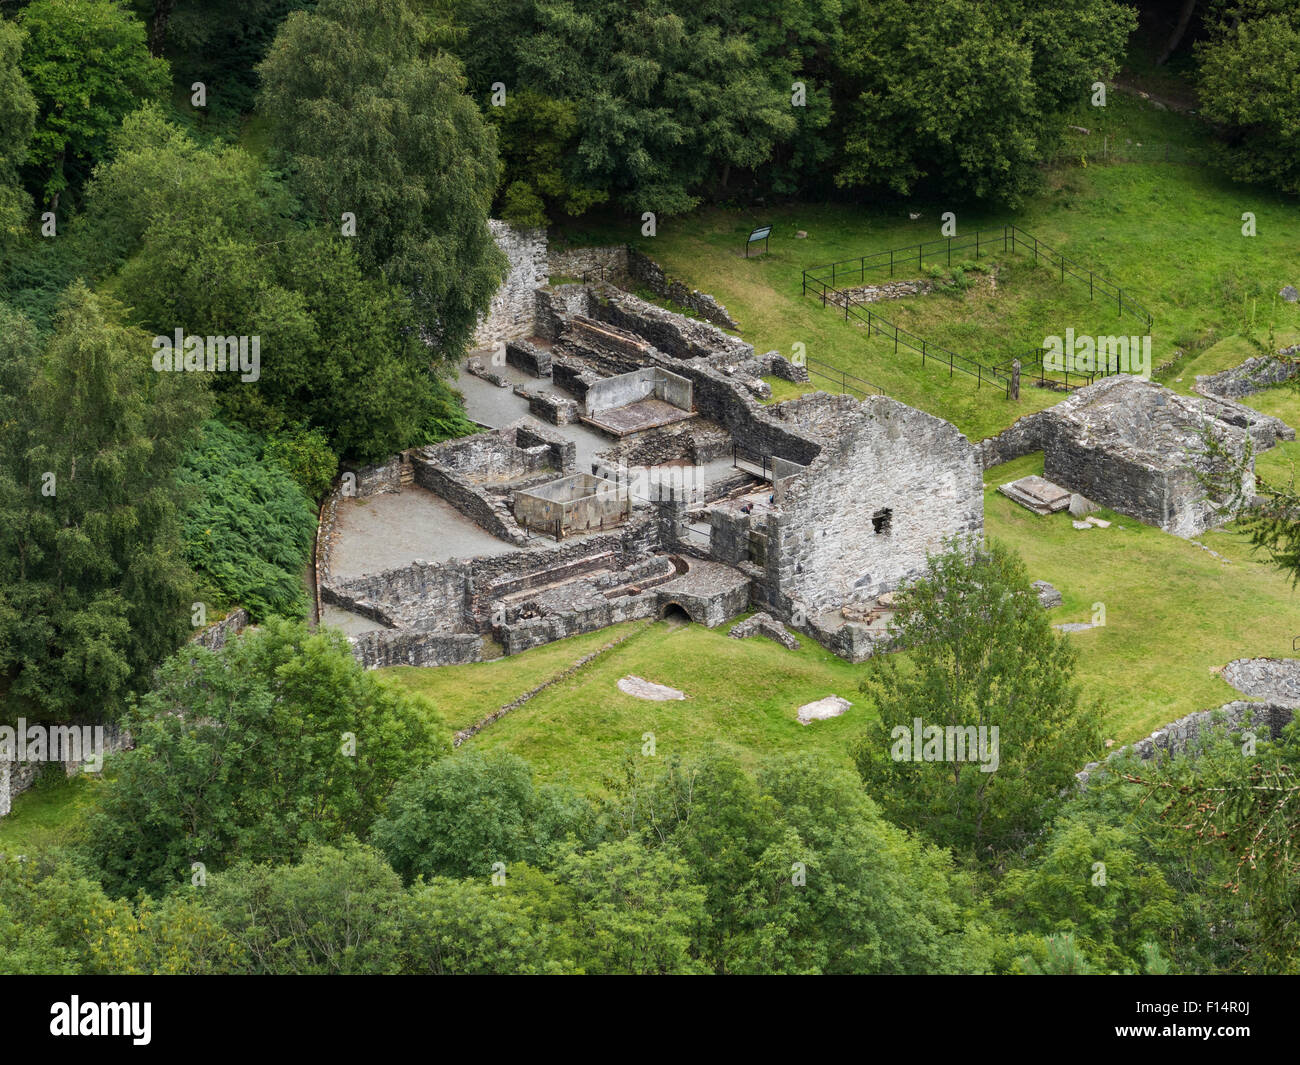 Wales, Powys, Llanidloes, Bryntail lead mine Stock Photo